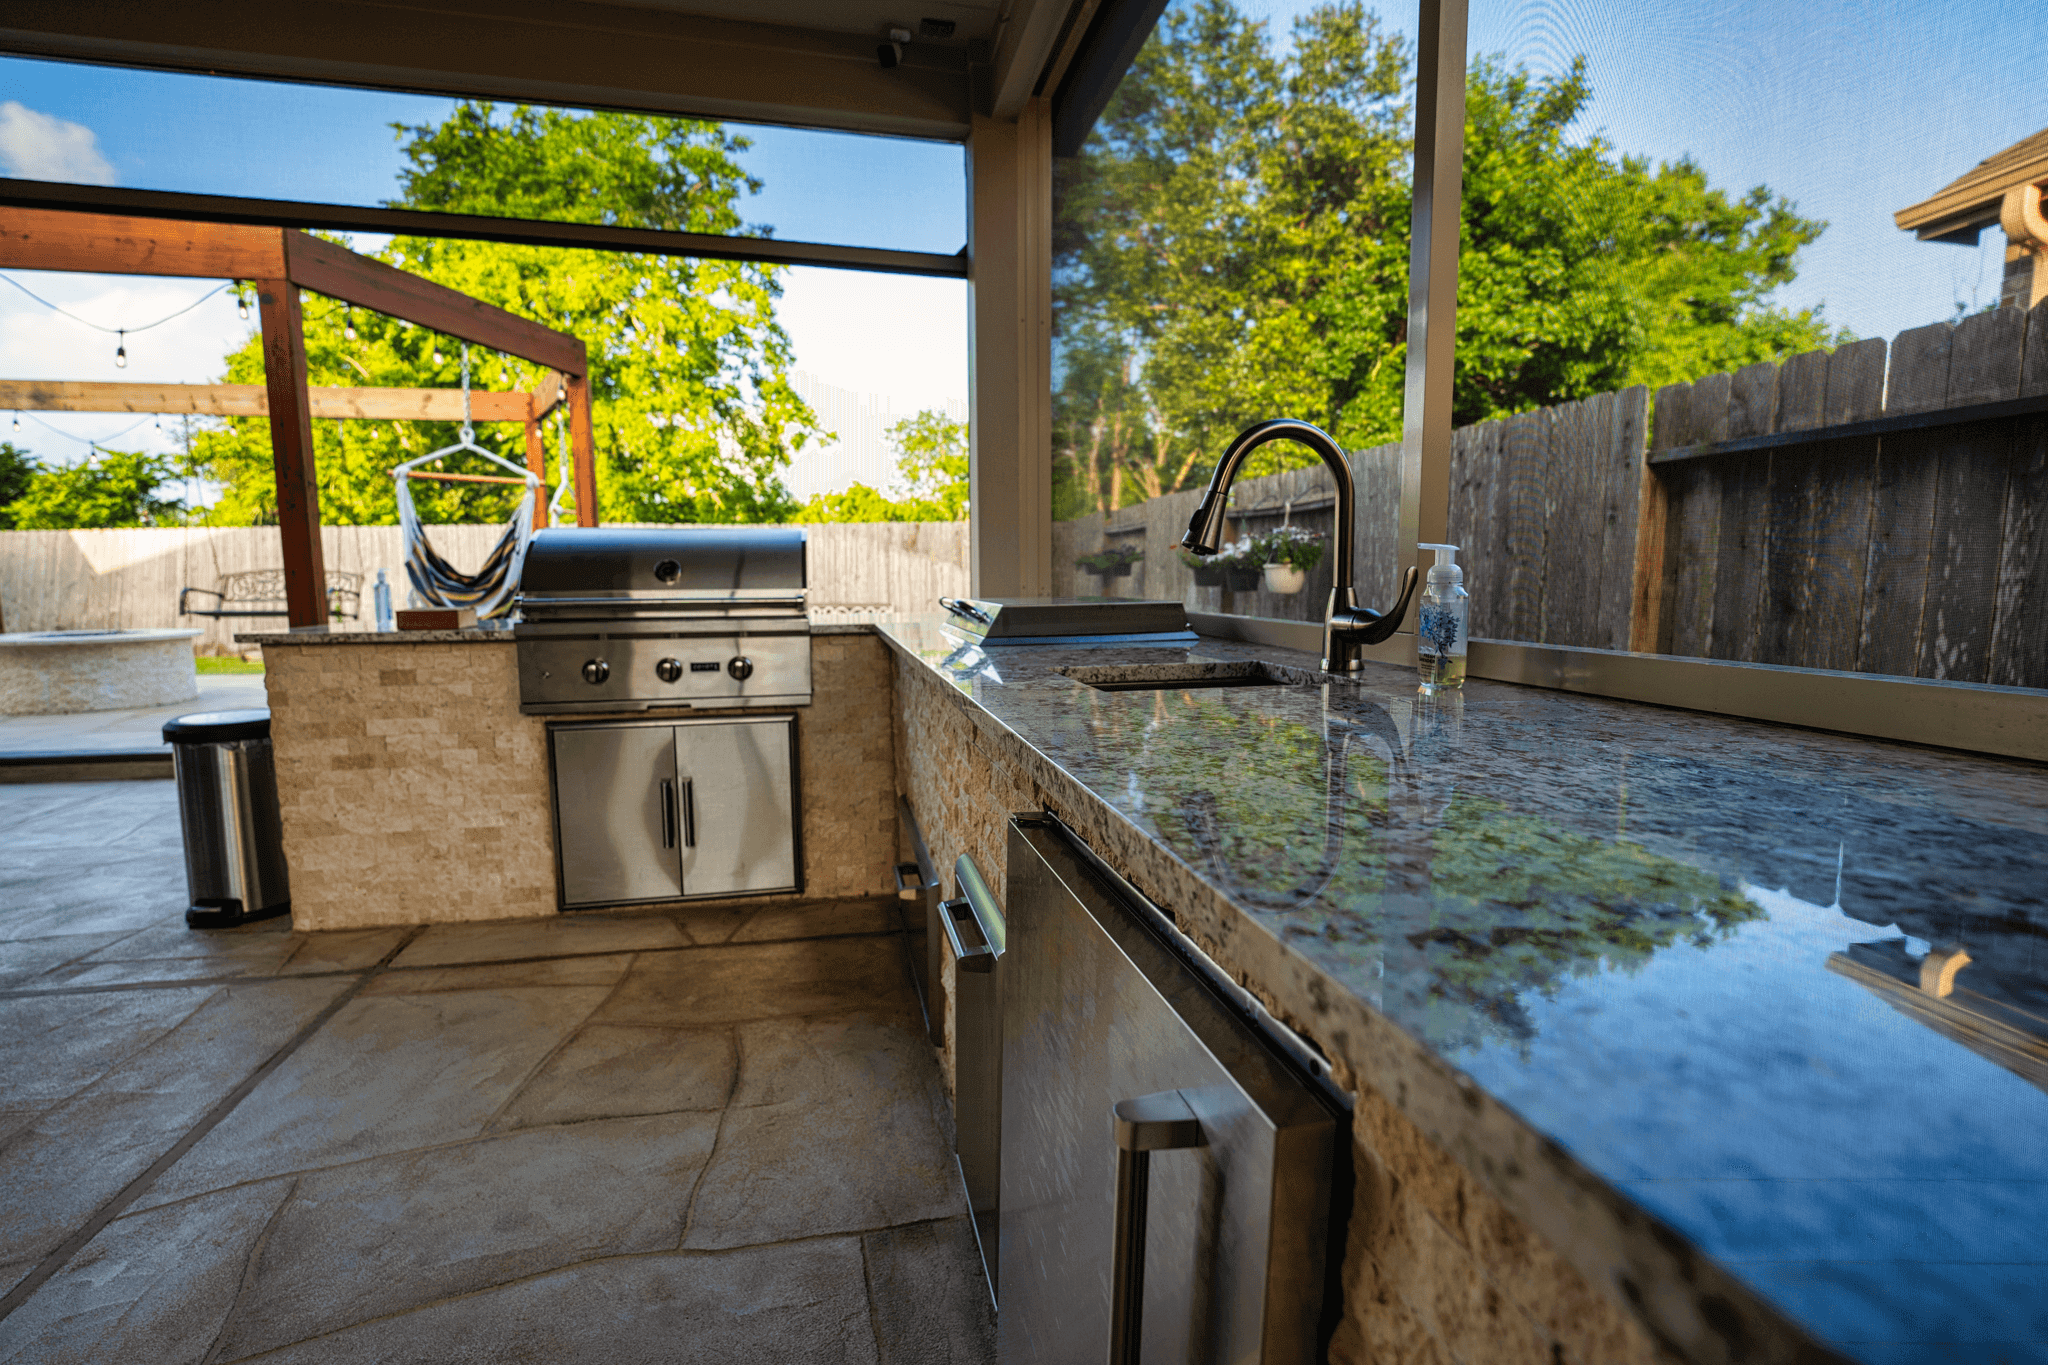 Outdoor kitchen grill and sink area underneath a covered patio